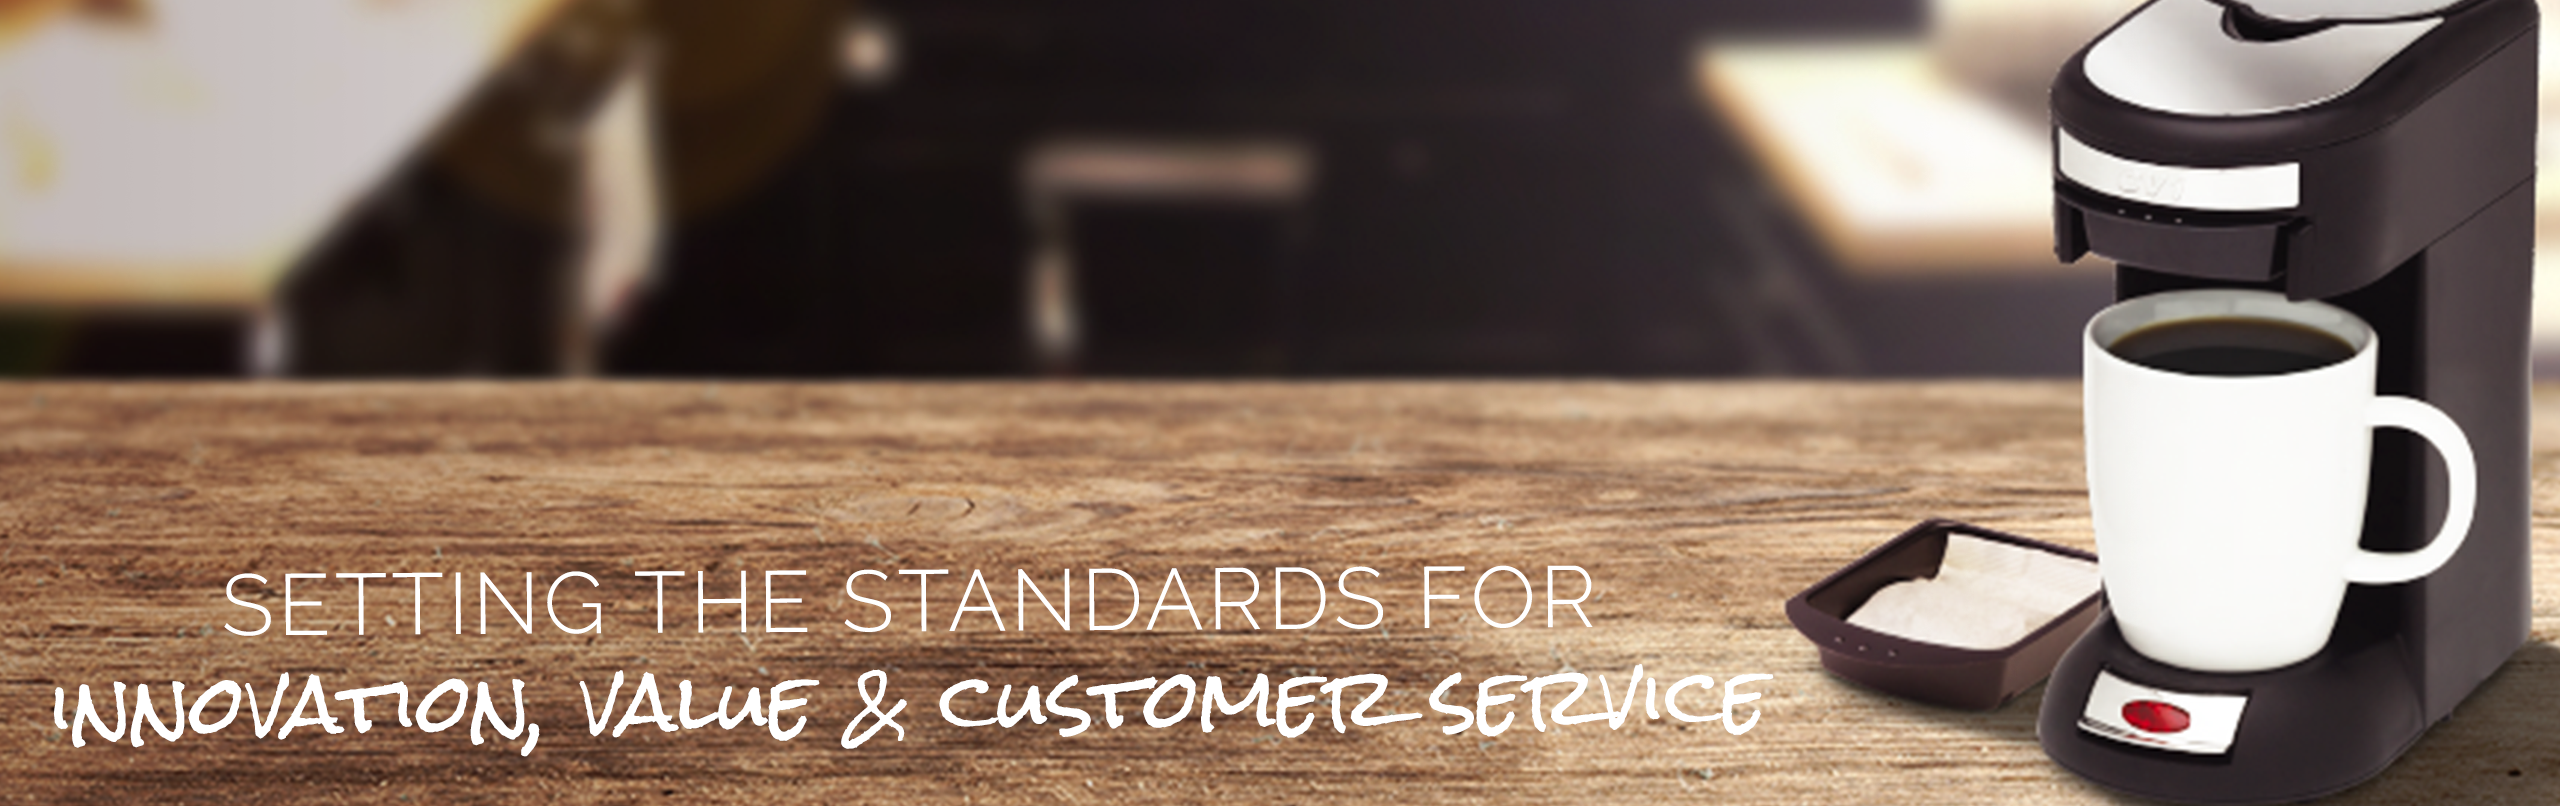 Setting the standards for innovation, value, and customer service